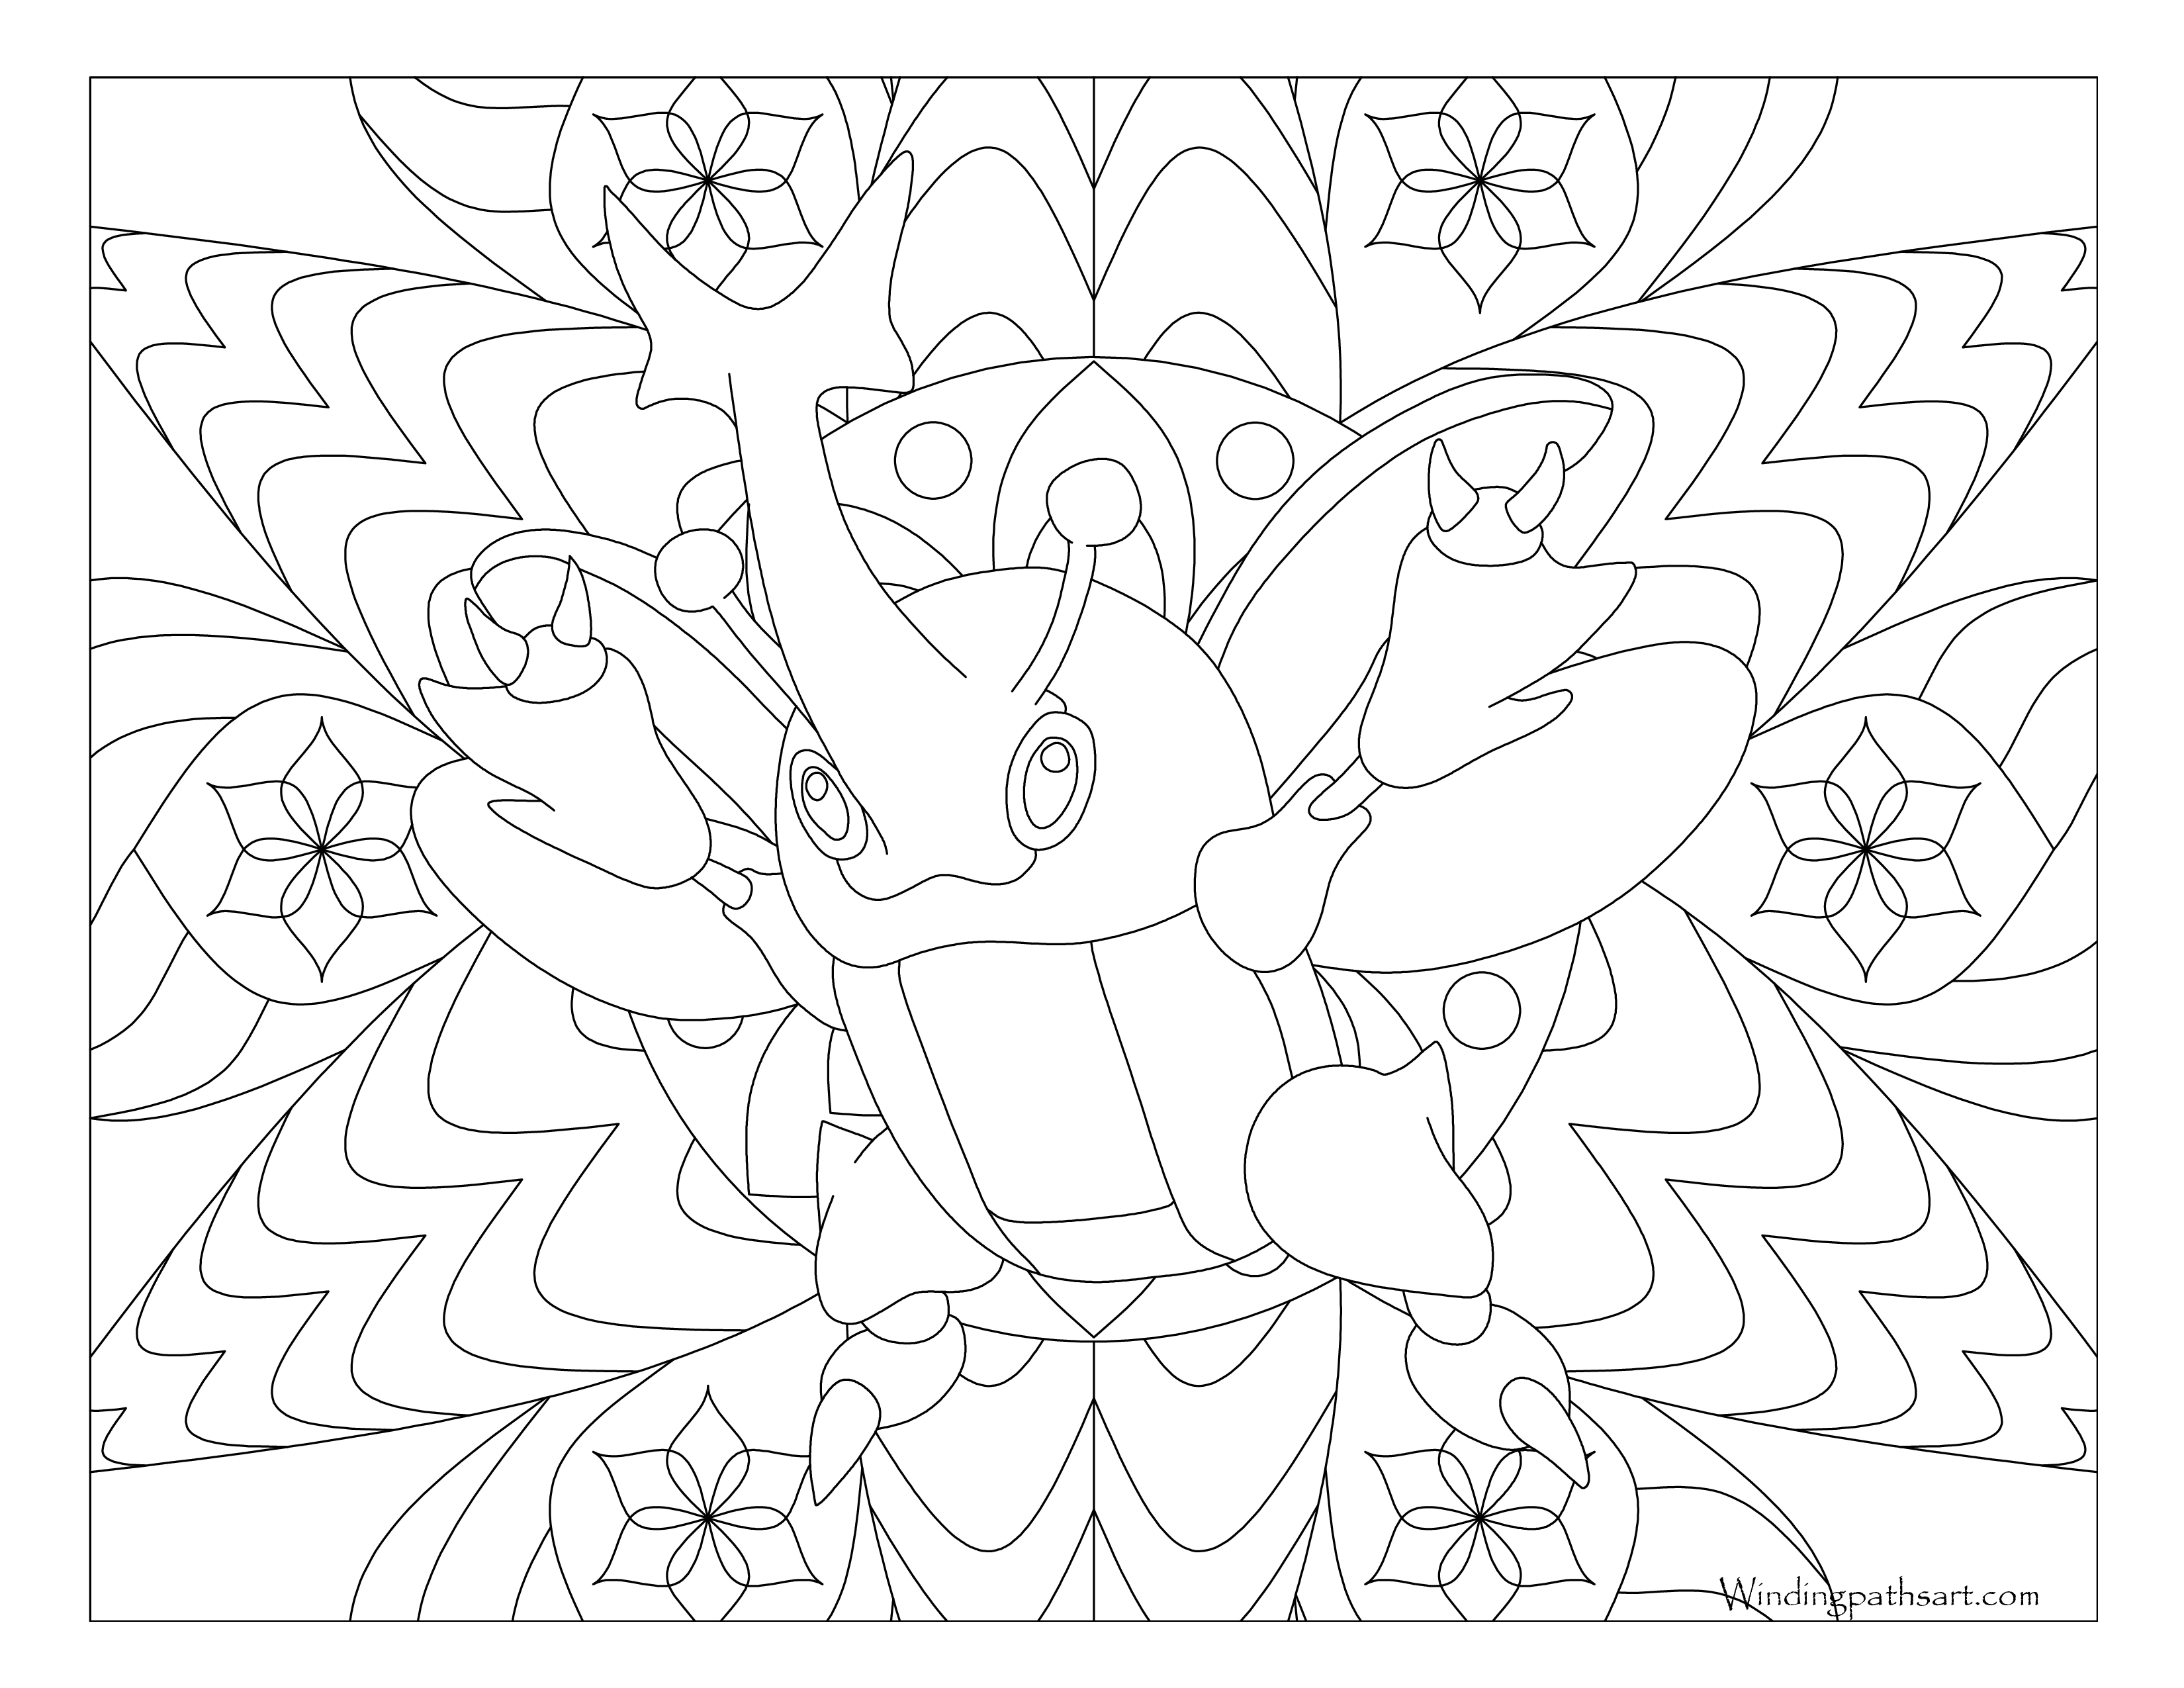 pokemon heracross coloring pages